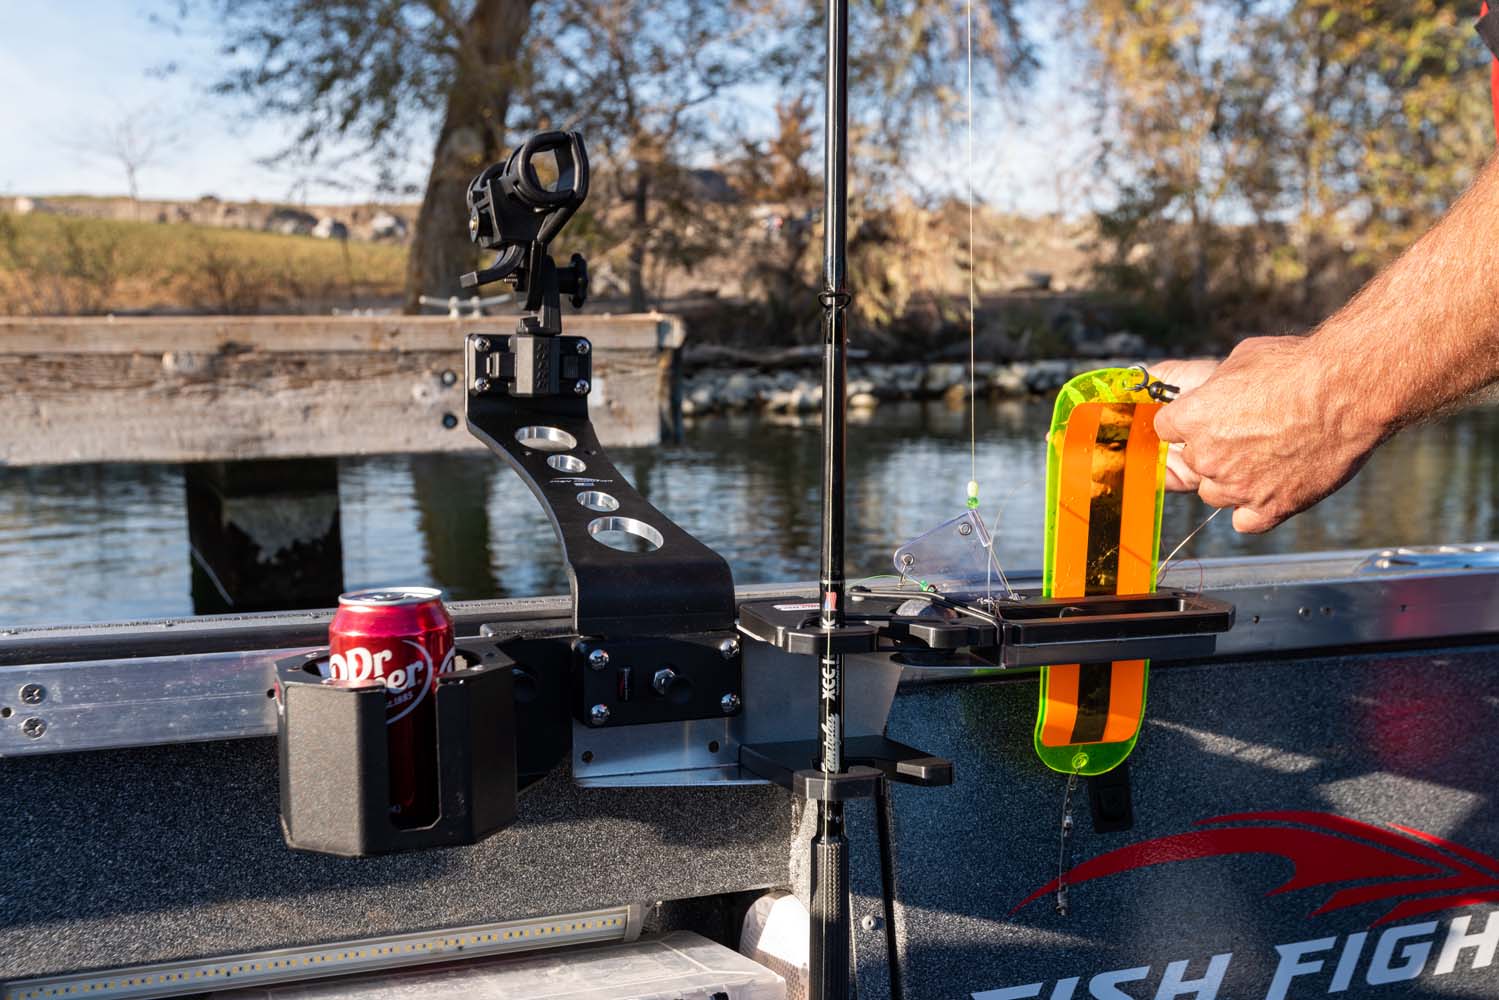 Tackle Tenders - Fish Fighter® Products